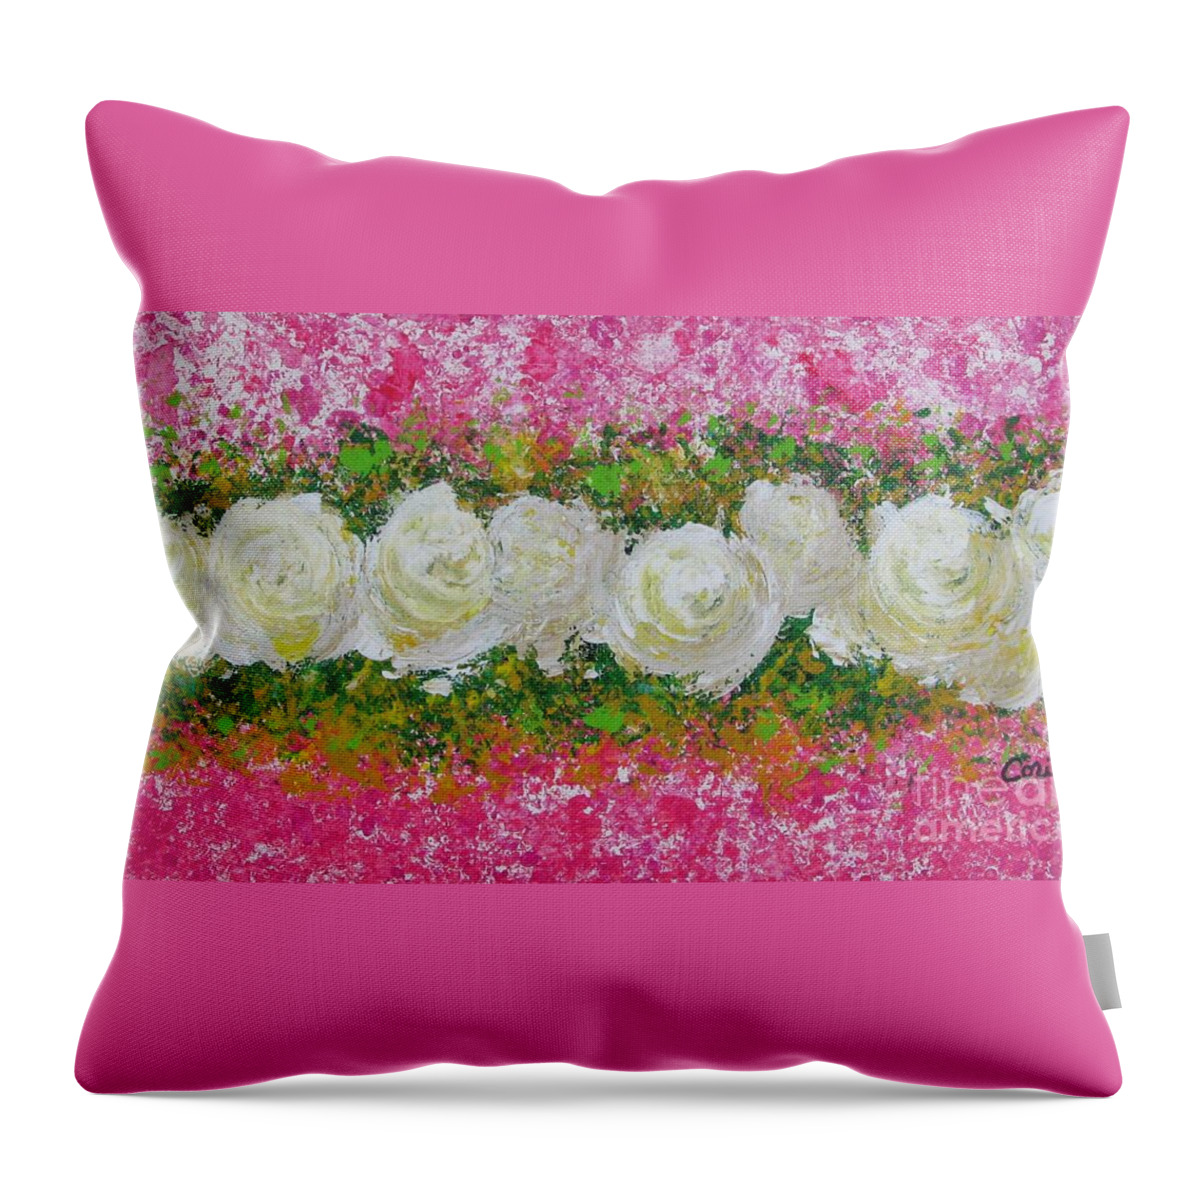 Flowerline Throw Pillow featuring the painting Flowerline in Pink and White by Corinne Carroll